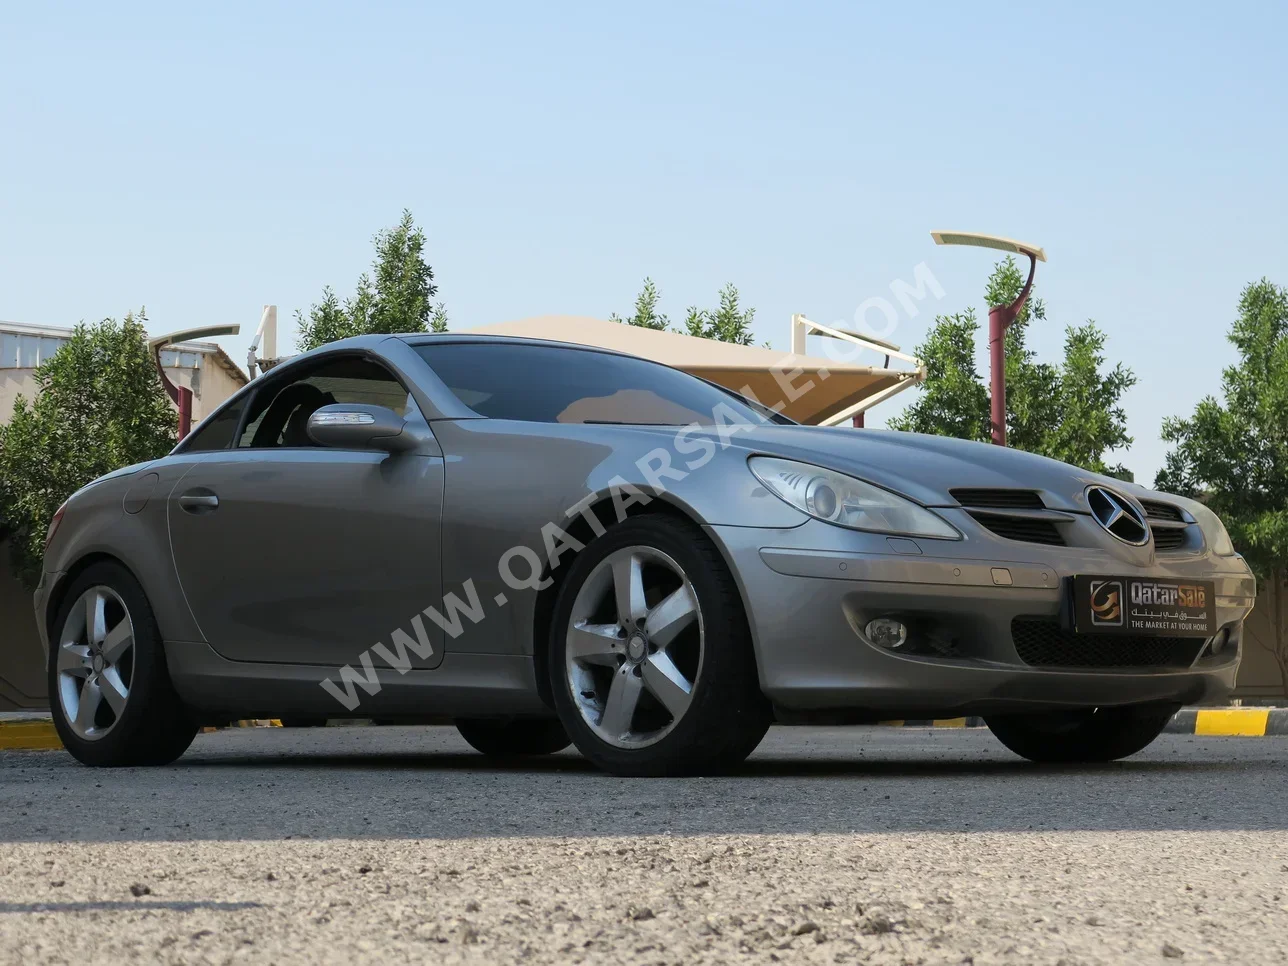 Mercedes-Benz  SLK  280  2008  Automatic  84,000 Km  6 Cylinder  Rear Wheel Drive (RWD)  Convertible  Silver